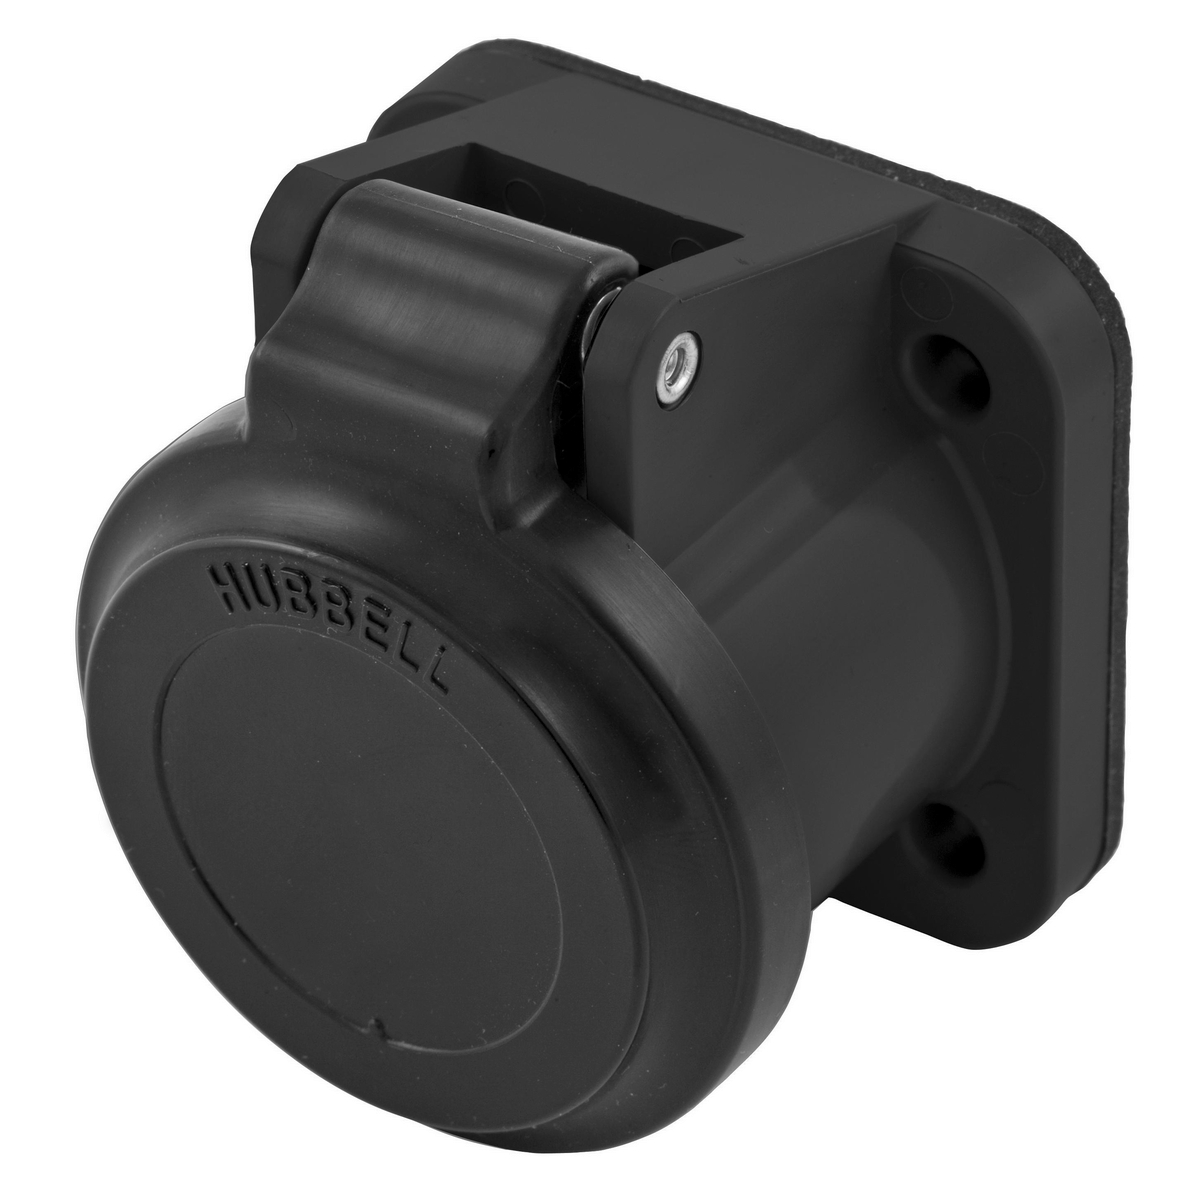 Hubbell Wiring Device Kellems, Single Pole Products, Non-Metallic Cover,Black